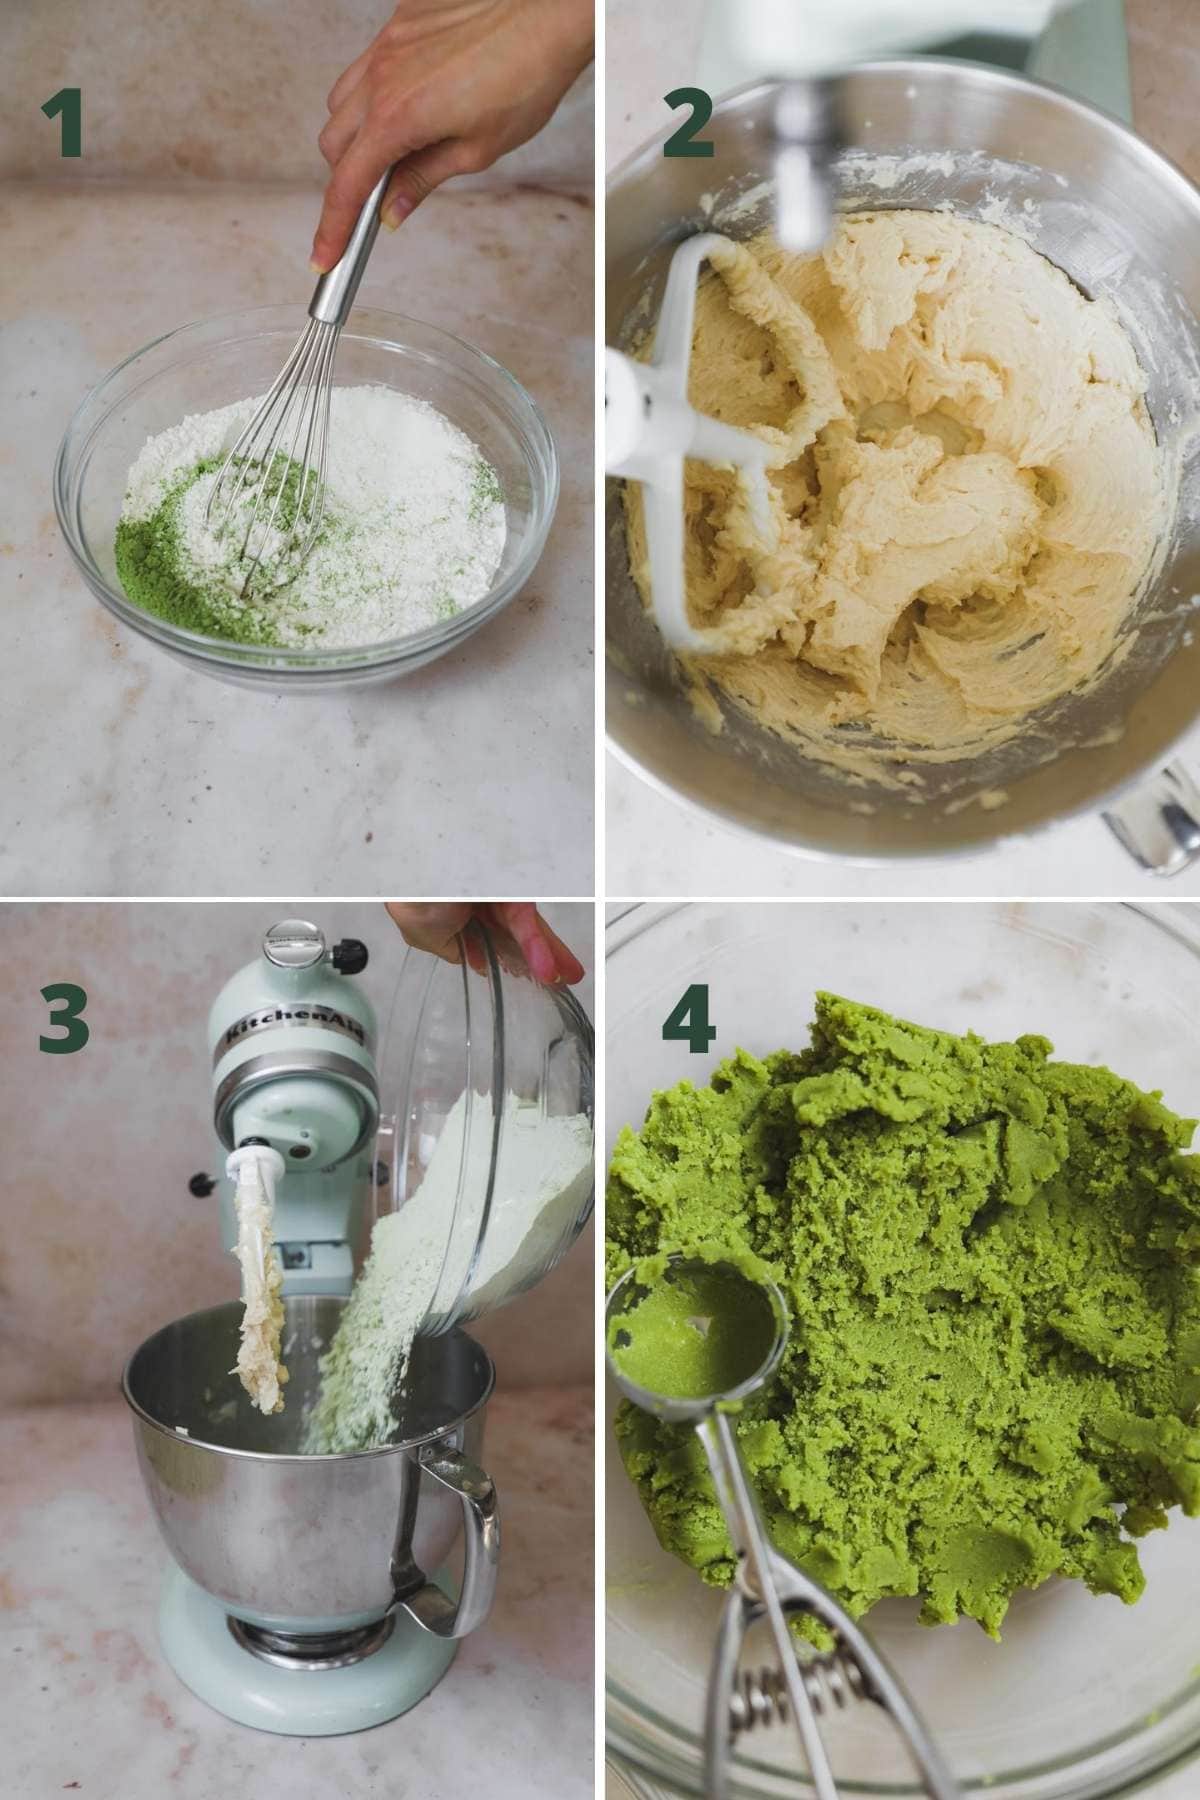 Matcha Cookie instructions and steps.